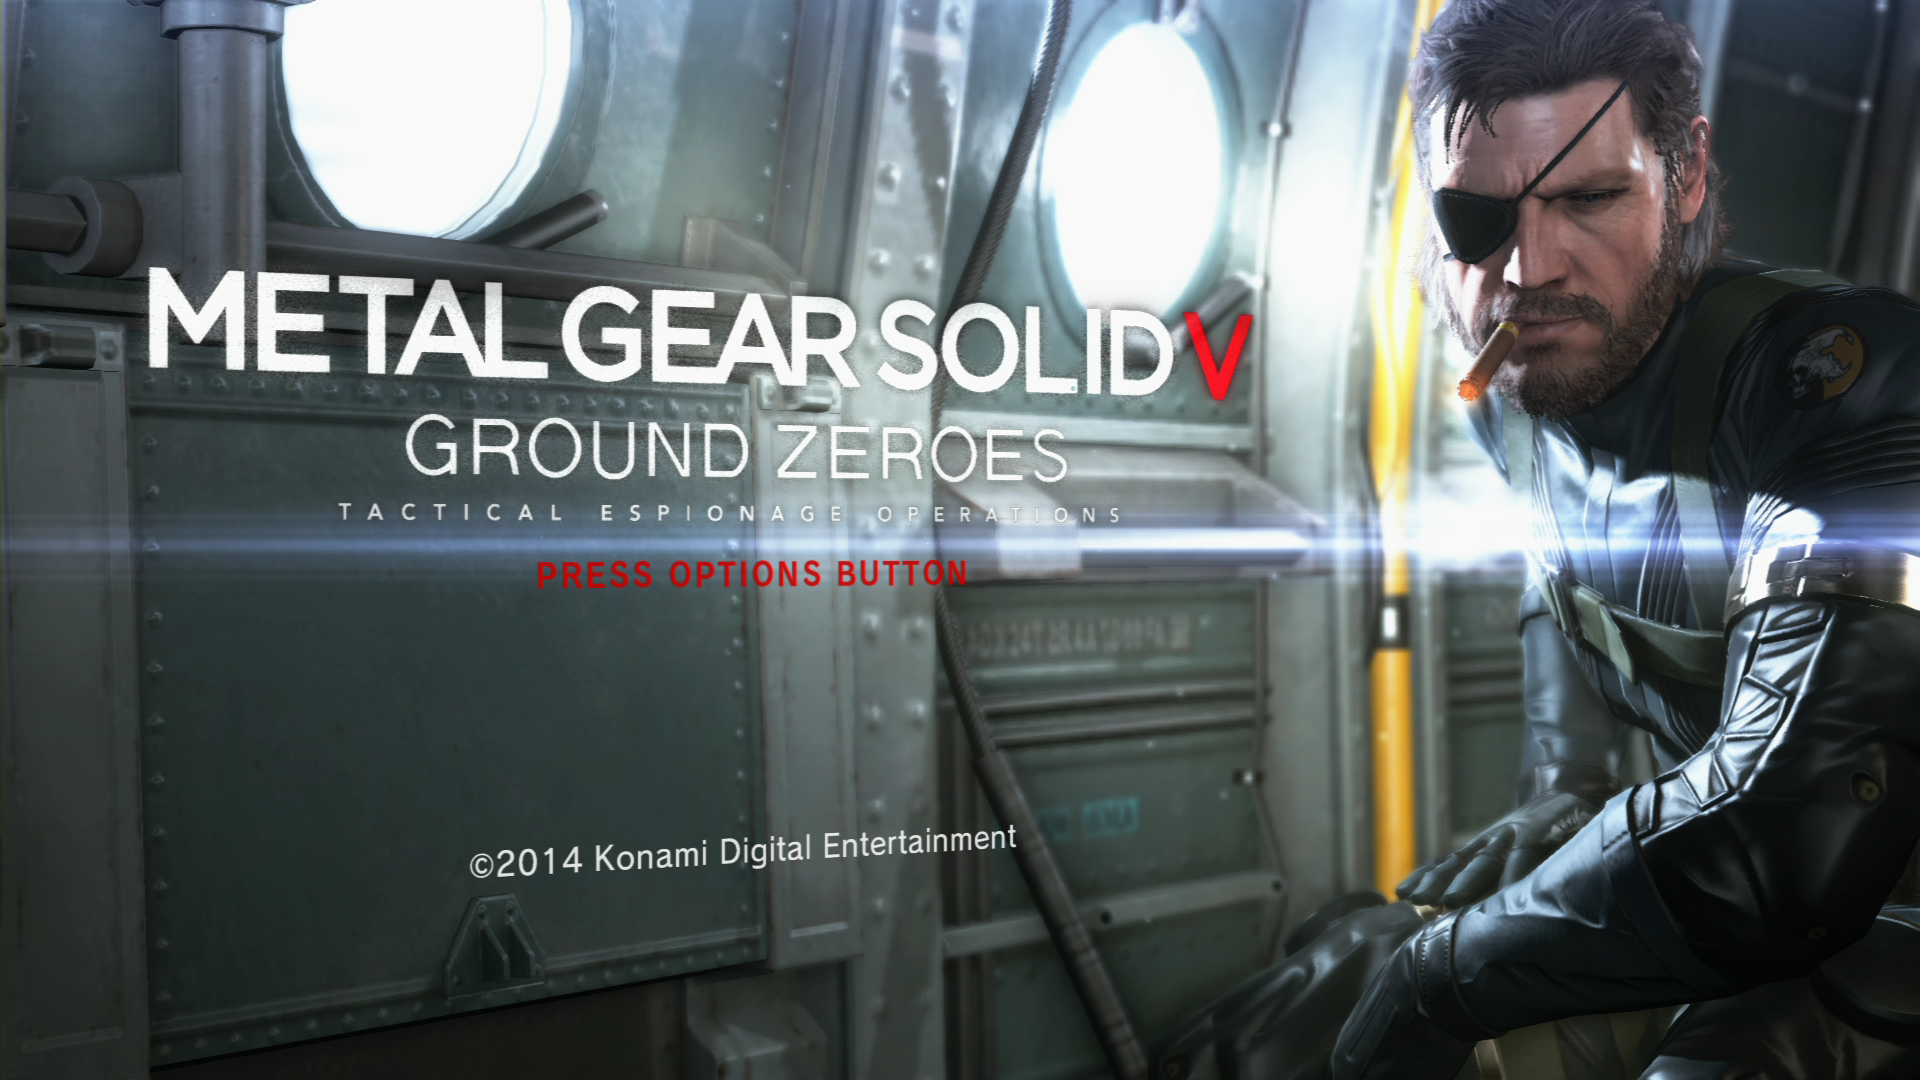 Nice Images Collection: Metal Gear Solid V: Ground Zeroes Desktop Wallpapers